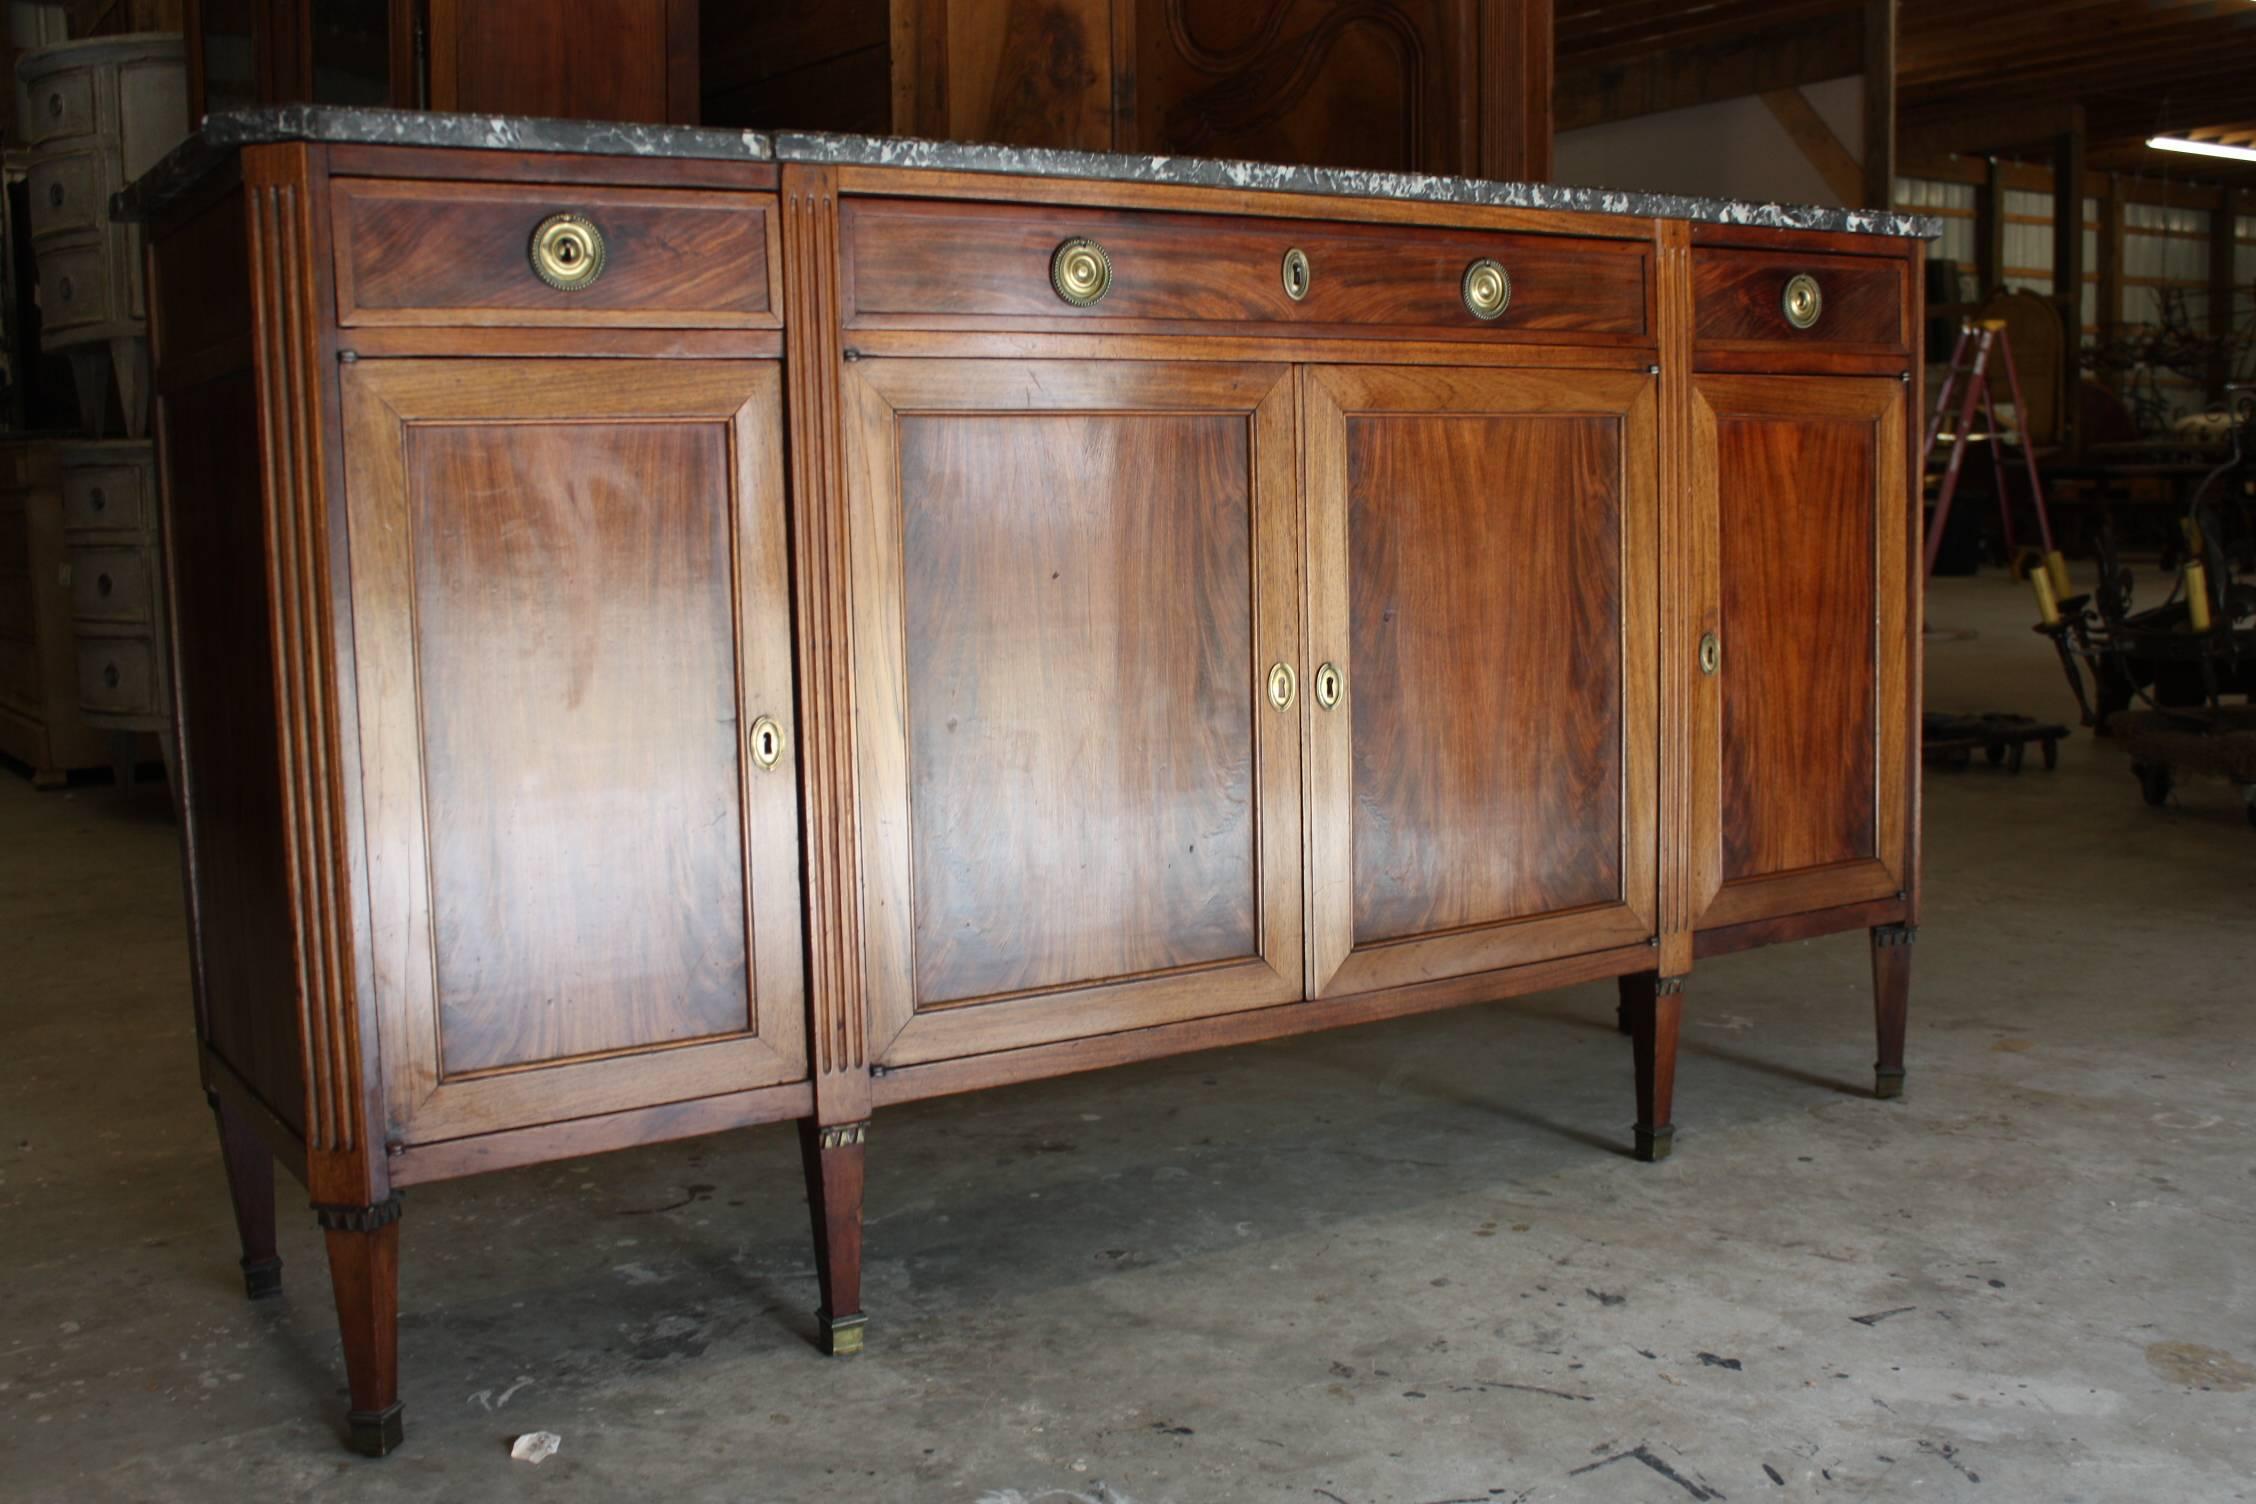 Antique fruitwood enfilade with original marble top from France, circa 1880. Flanked with three drawers on top, a double door and two side doors on both sides. Clean lines with beautiful patina and great storage.